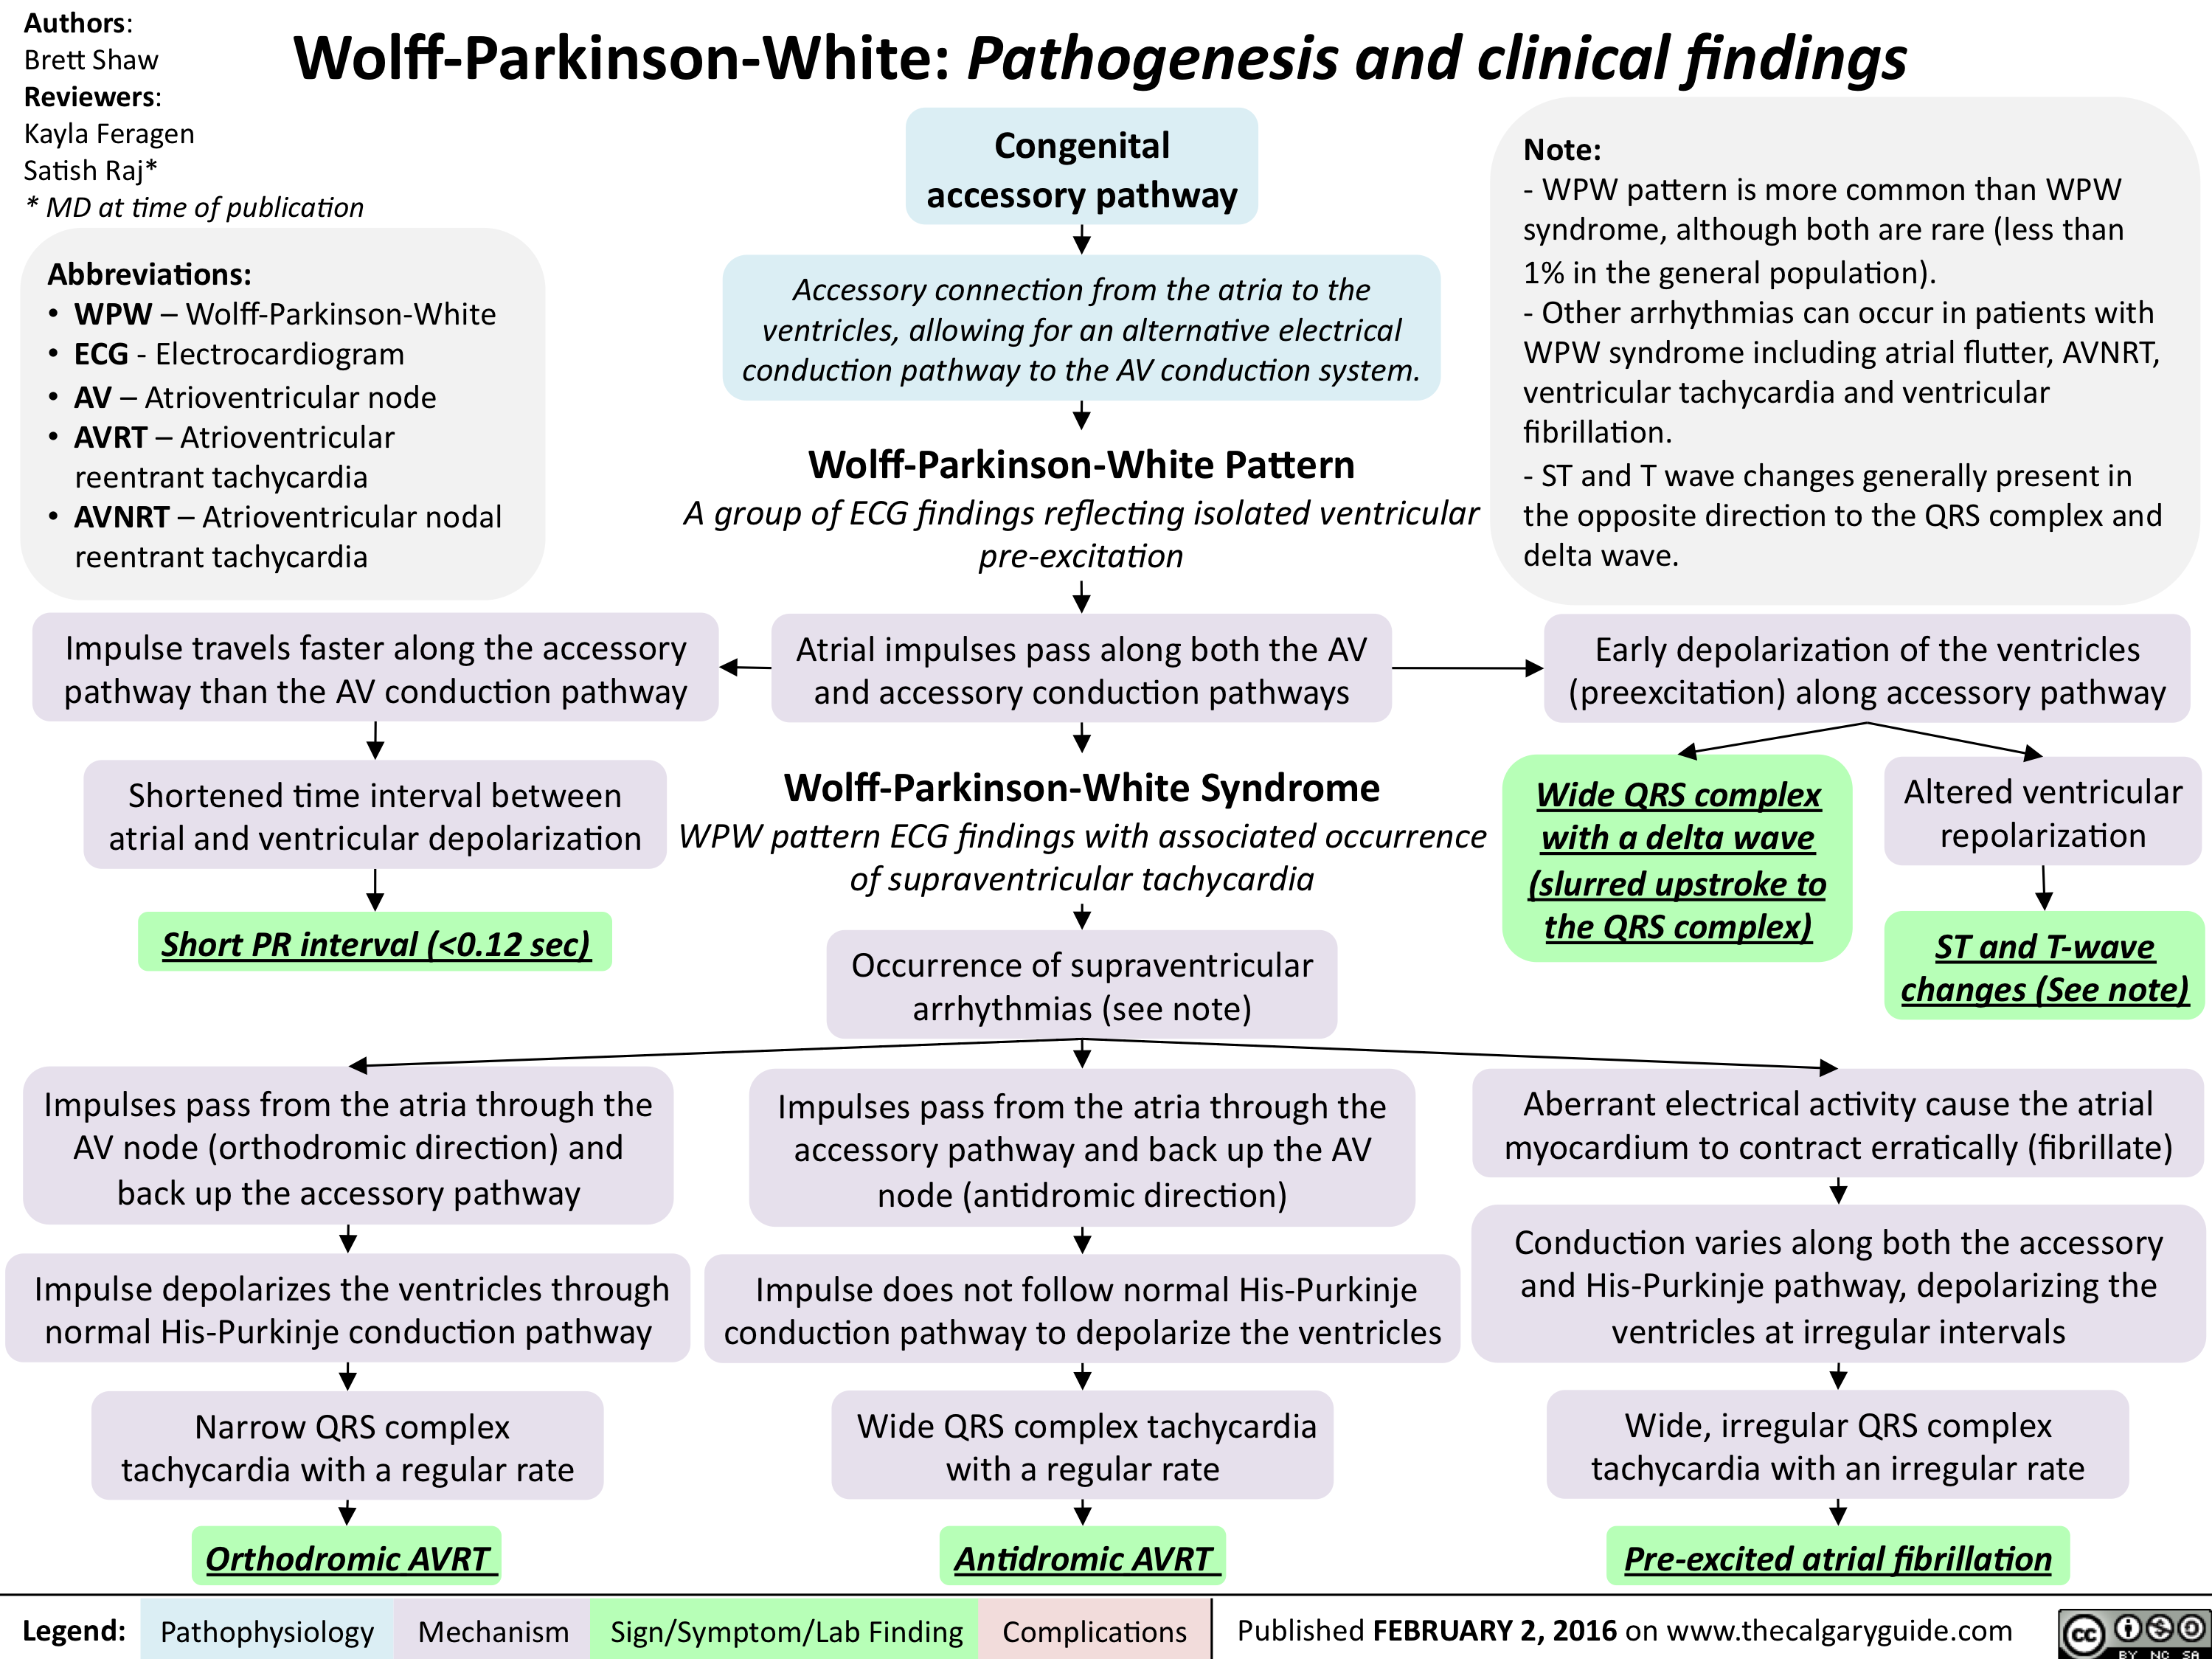 Wolff Parkinson White - Pathogenesis and clinical findings